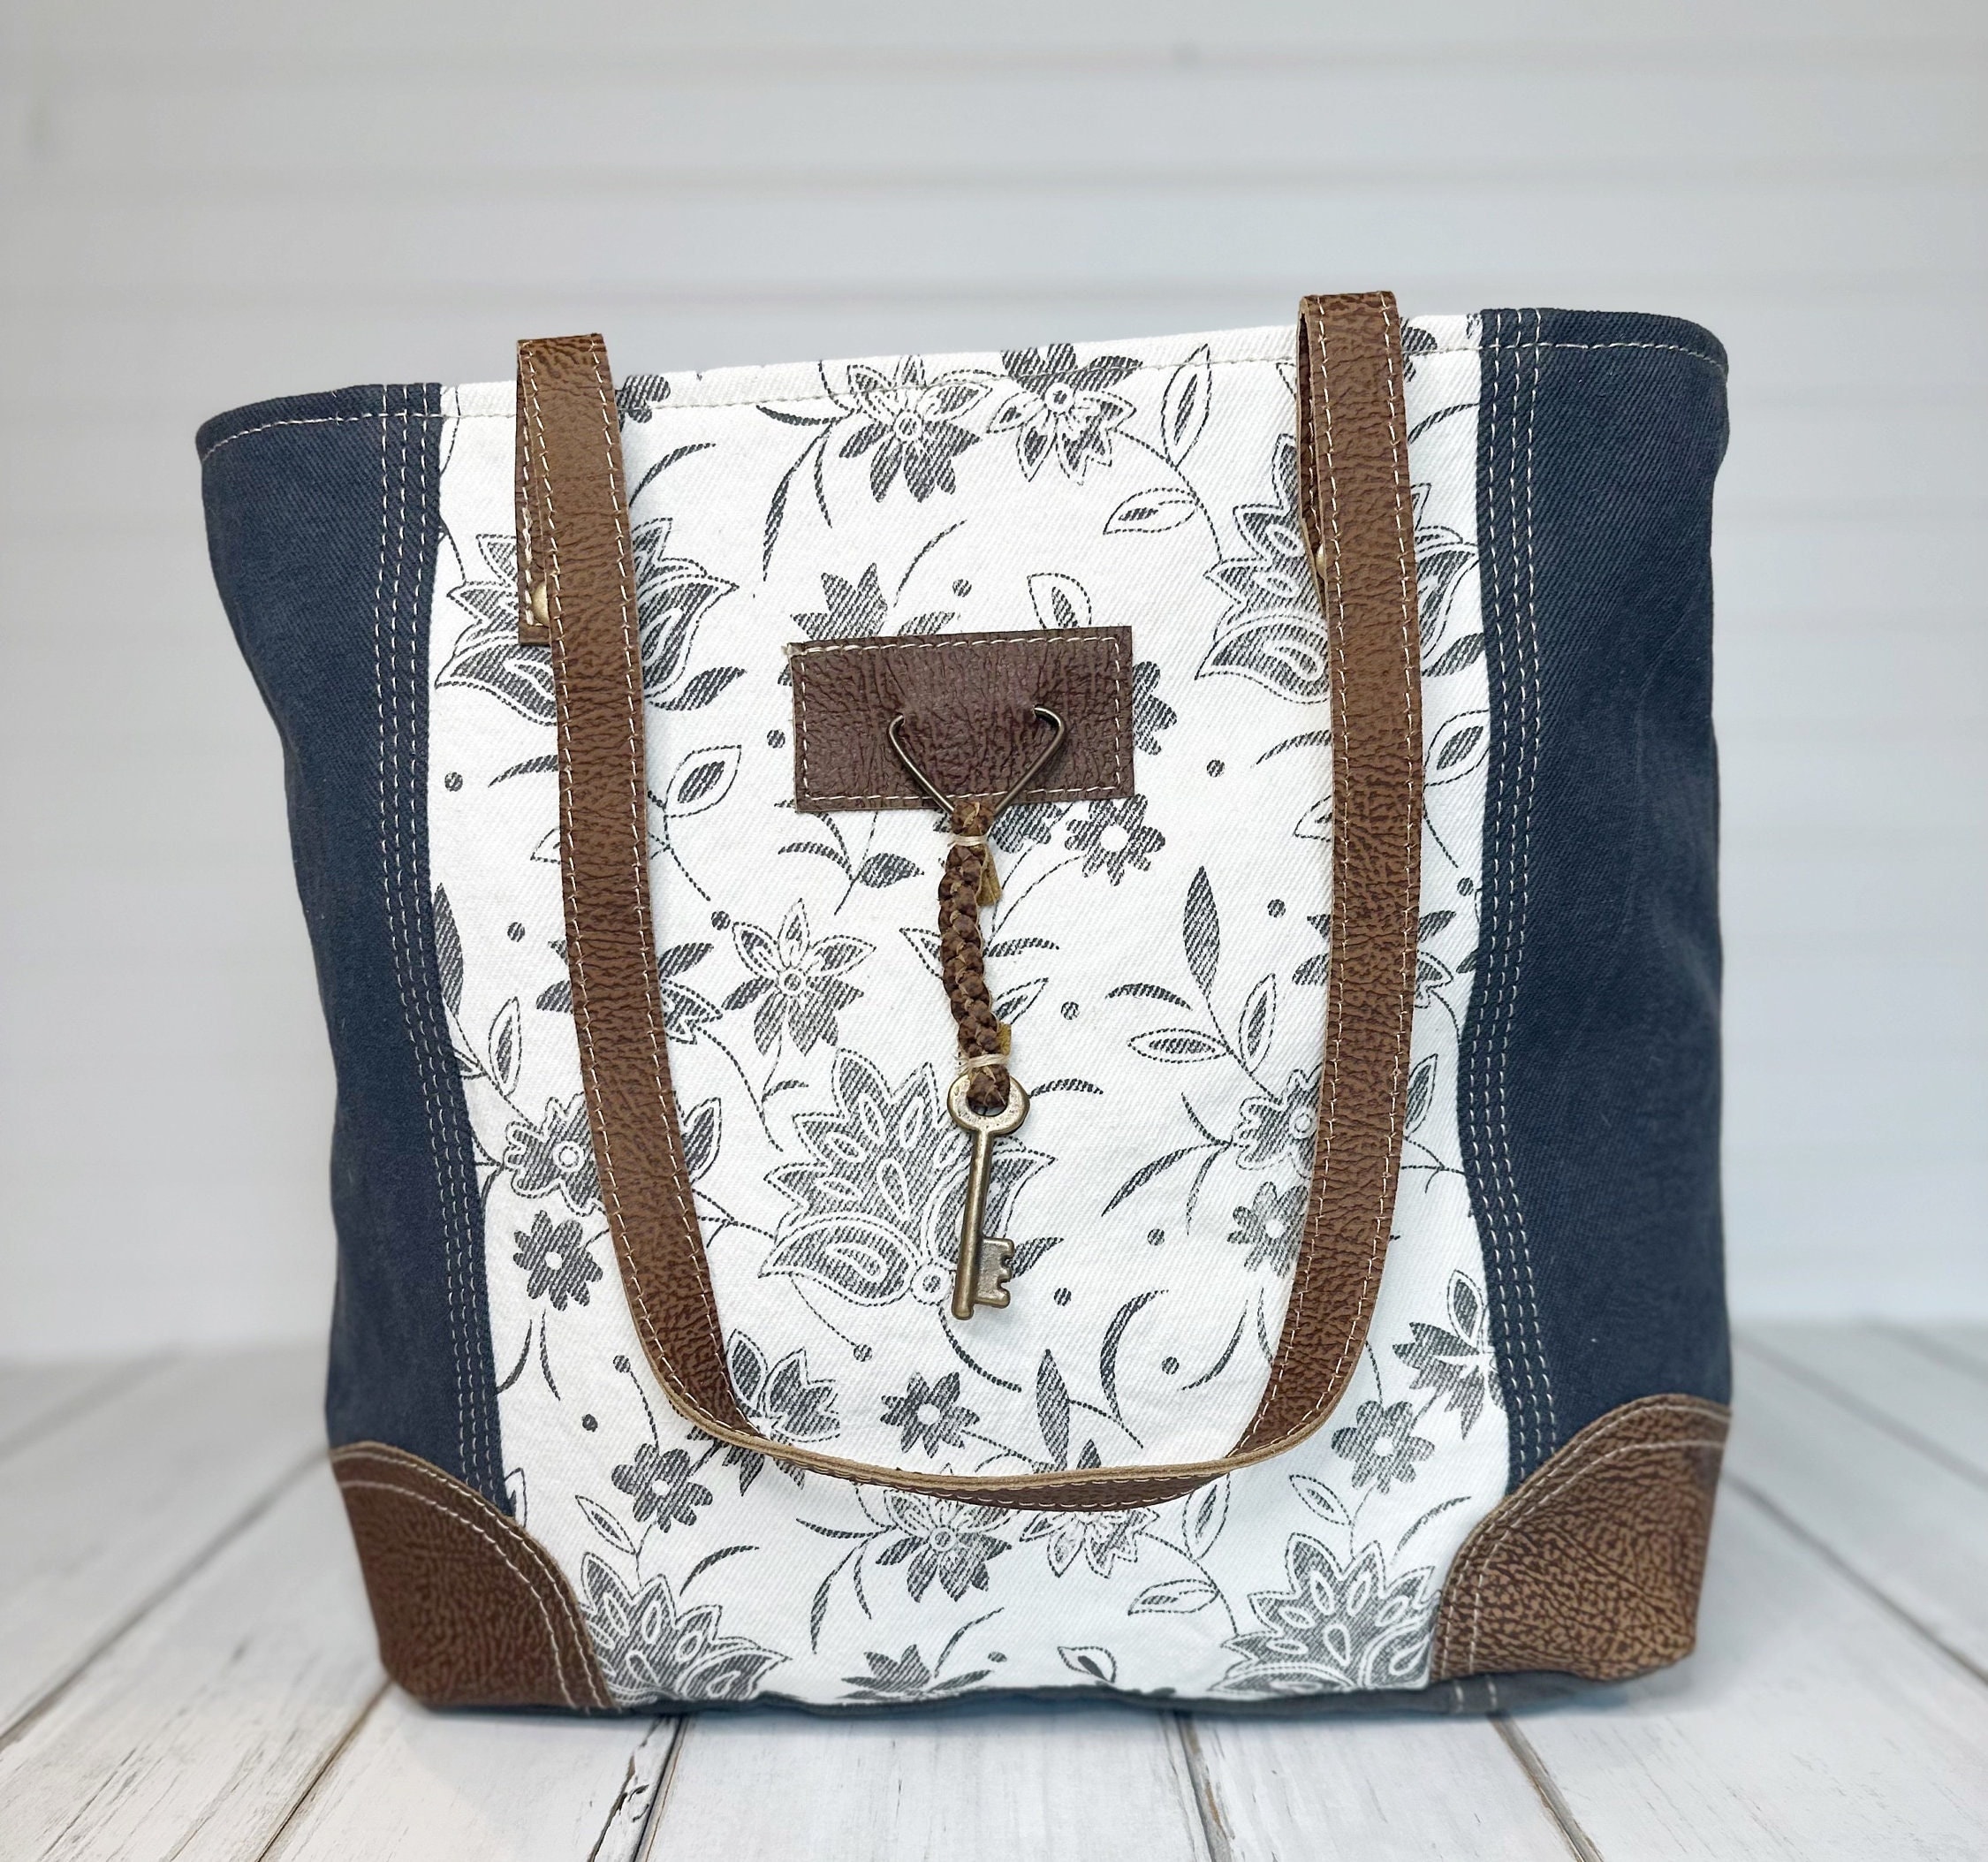 Upcycled Fabric Tote Bag for Women - Rimagined